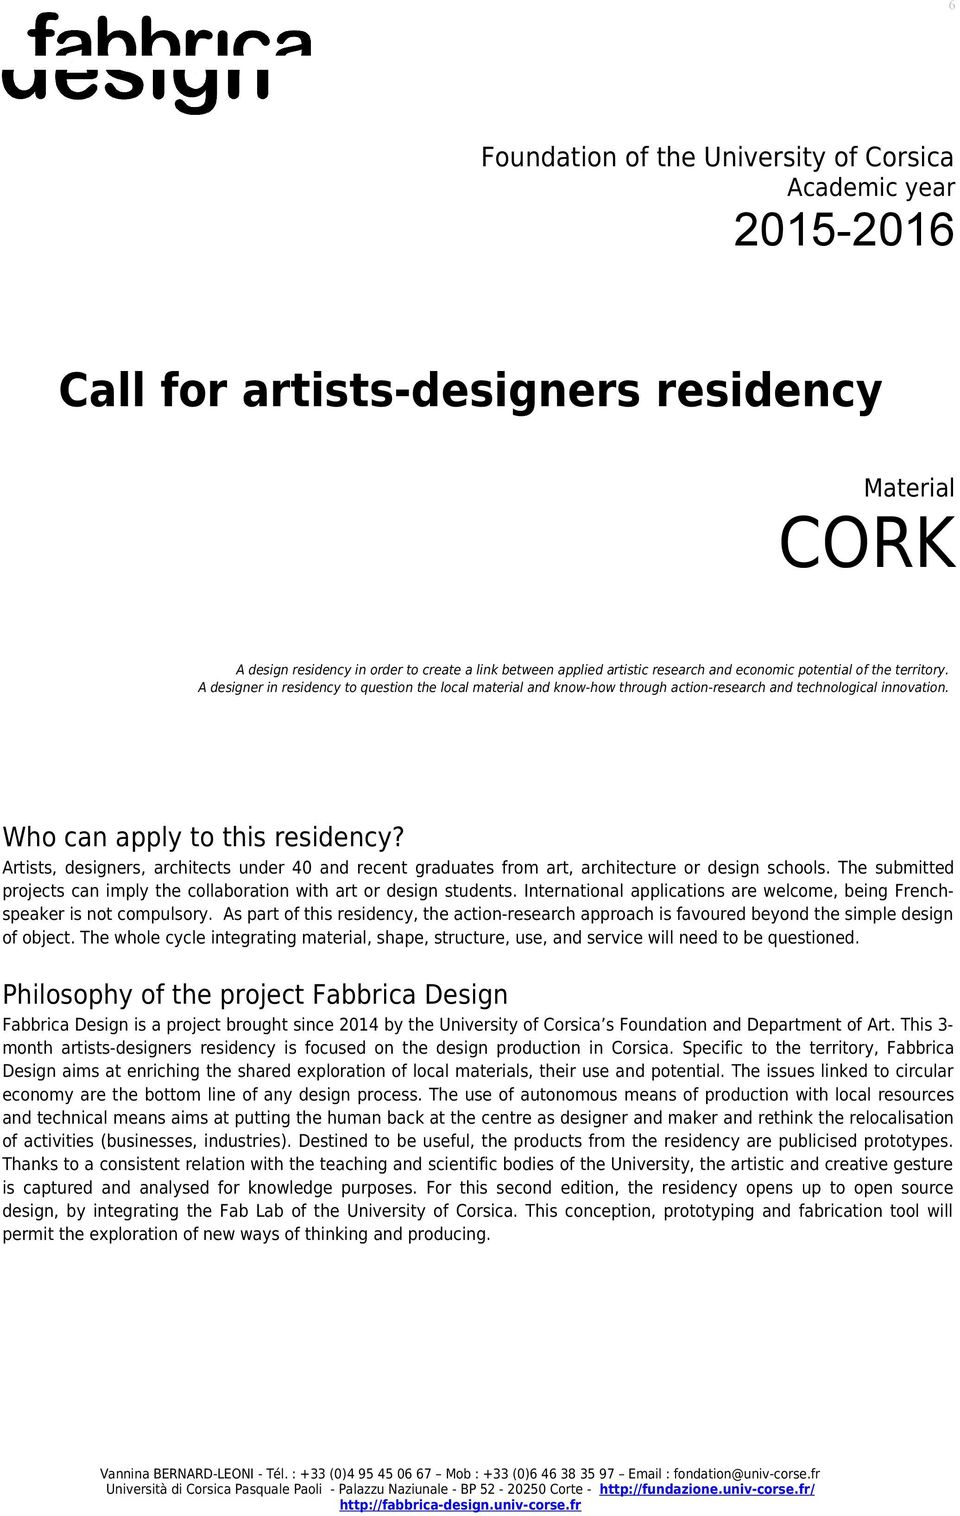 Artists, designers, architects under 40 and recent graduates from art, architecture or design schools. The submitted projects can imply the collaboration with art or design students.